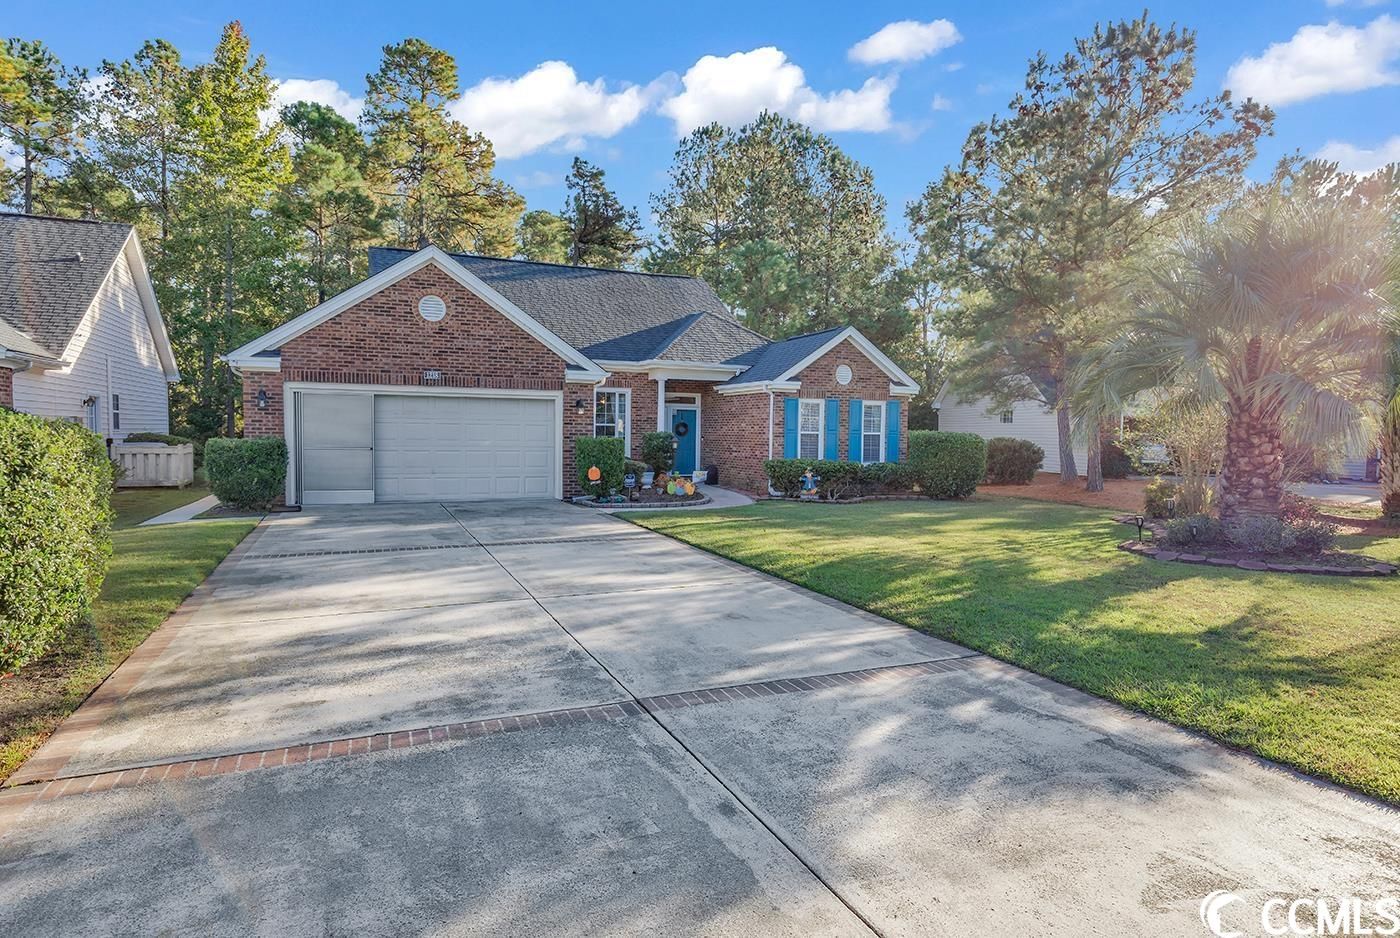 image of property at 1218 Loblolly Ln.